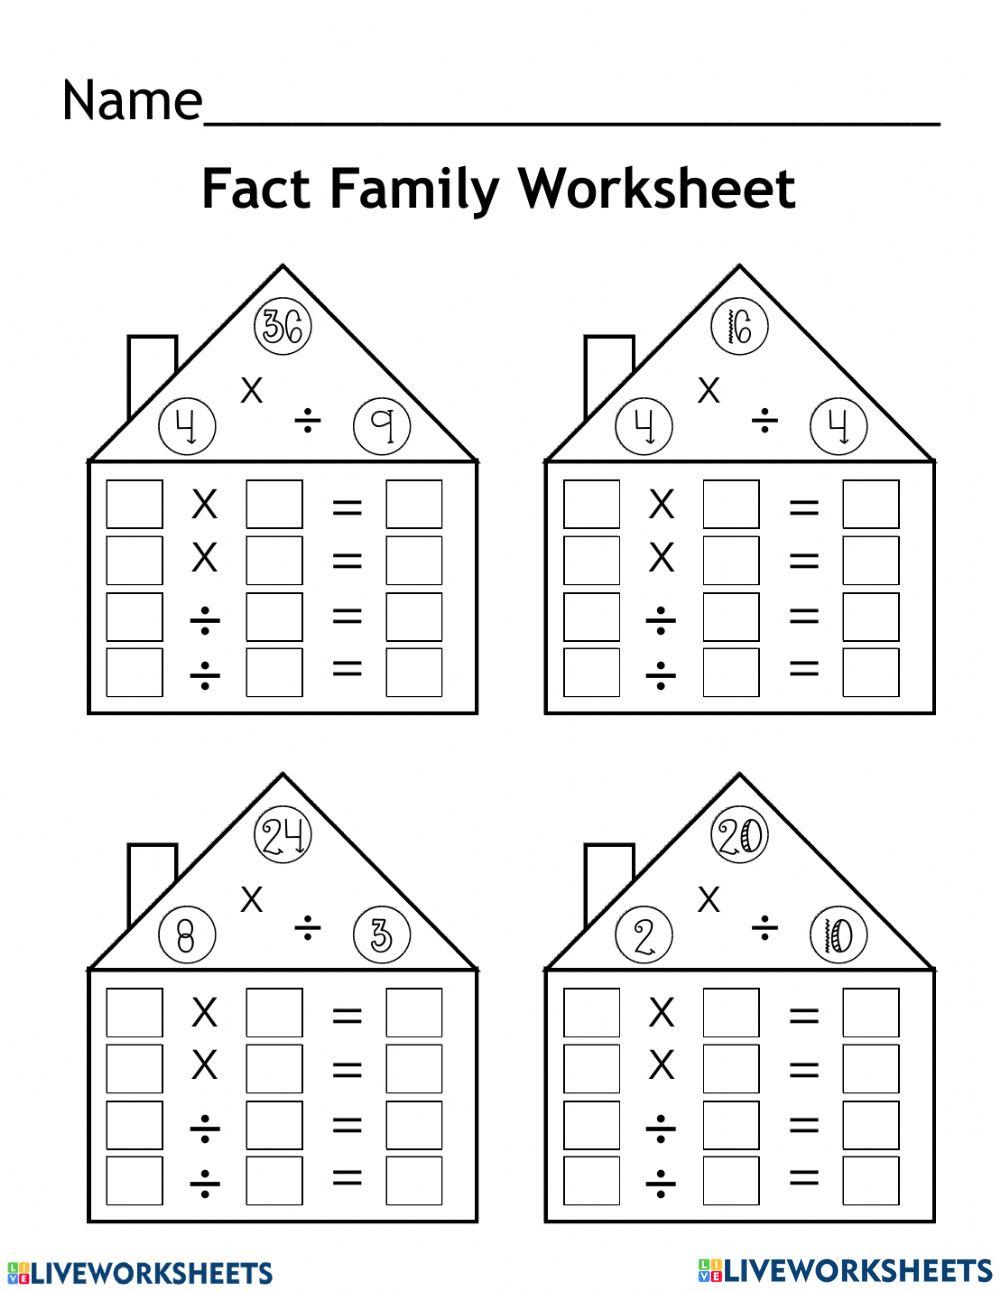 Division-Multiplication Fact Families